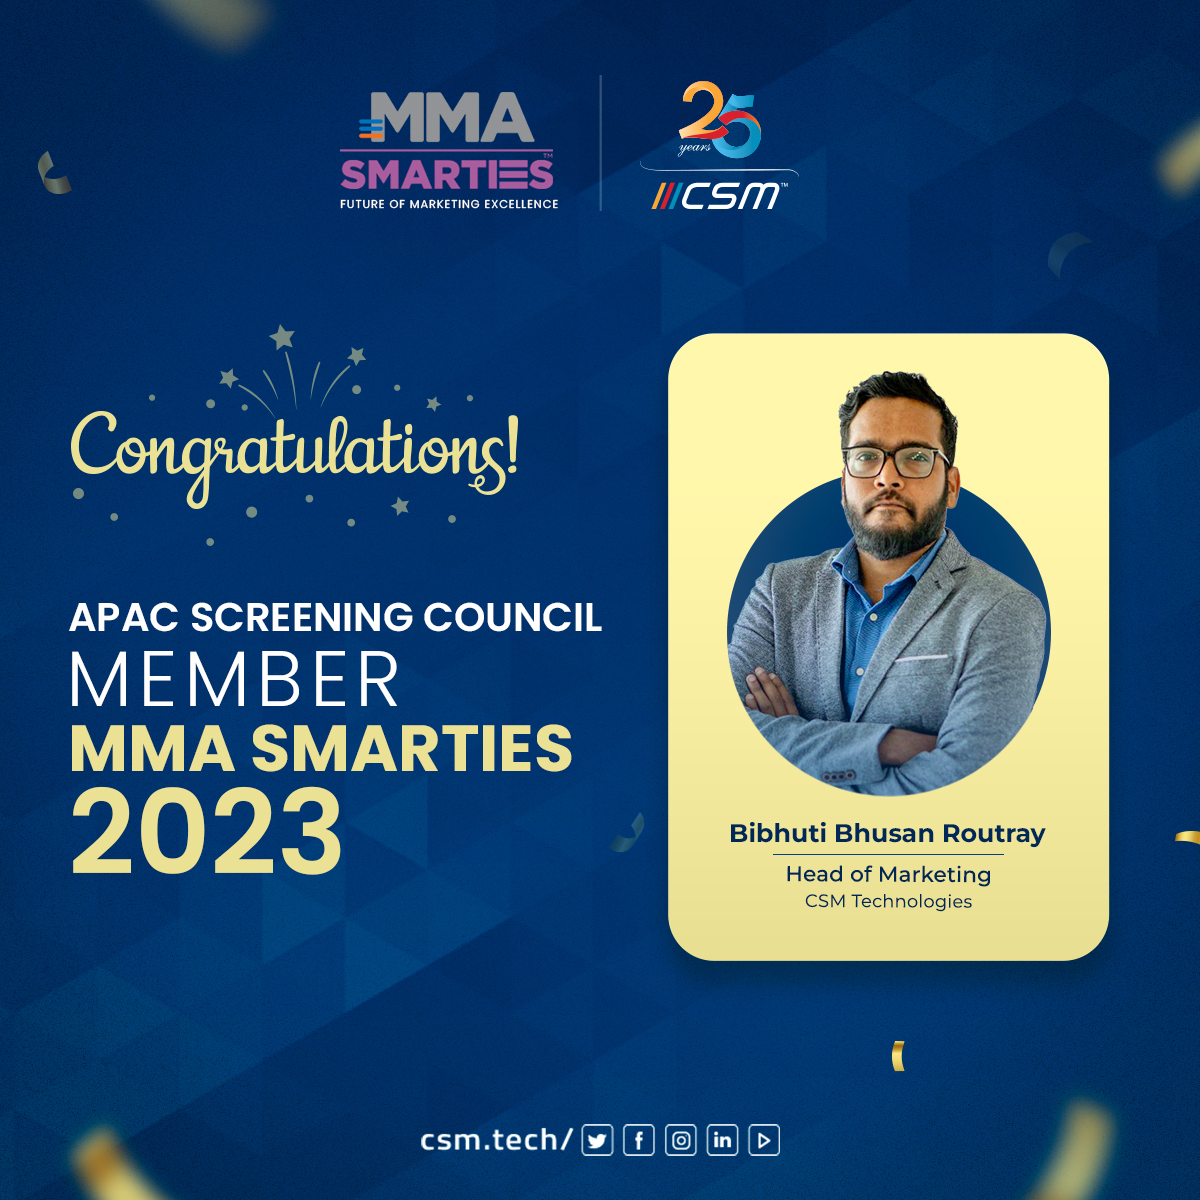 We're thrilled to announce that Bibhuti Bhusan Routray (Head of Marketing) will be part of Mobile Marketing Association’s prestigious APAC Screening Council for the SMARTIES Award 2023.
@bibhuti_ro 

@MMAglobal @MMA_APAC  #CSMTech #MMAGlobal #SMARTIESAPAC #SMARTIES